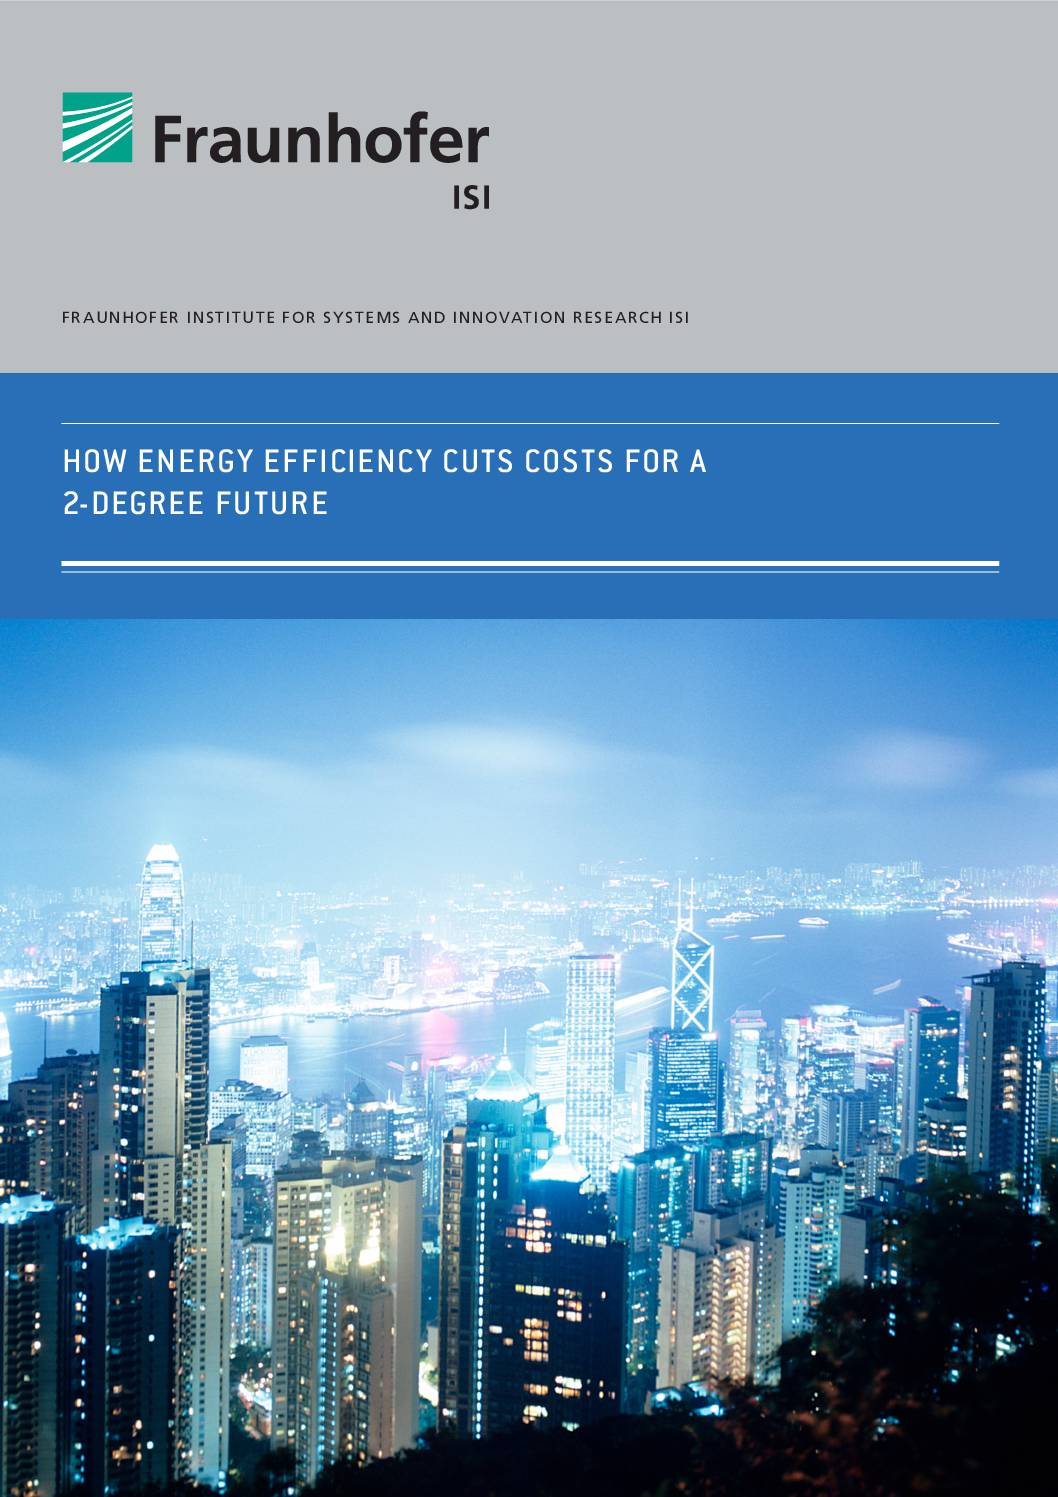 How Energy Efficiency Cuts Costs for a 2°C Future